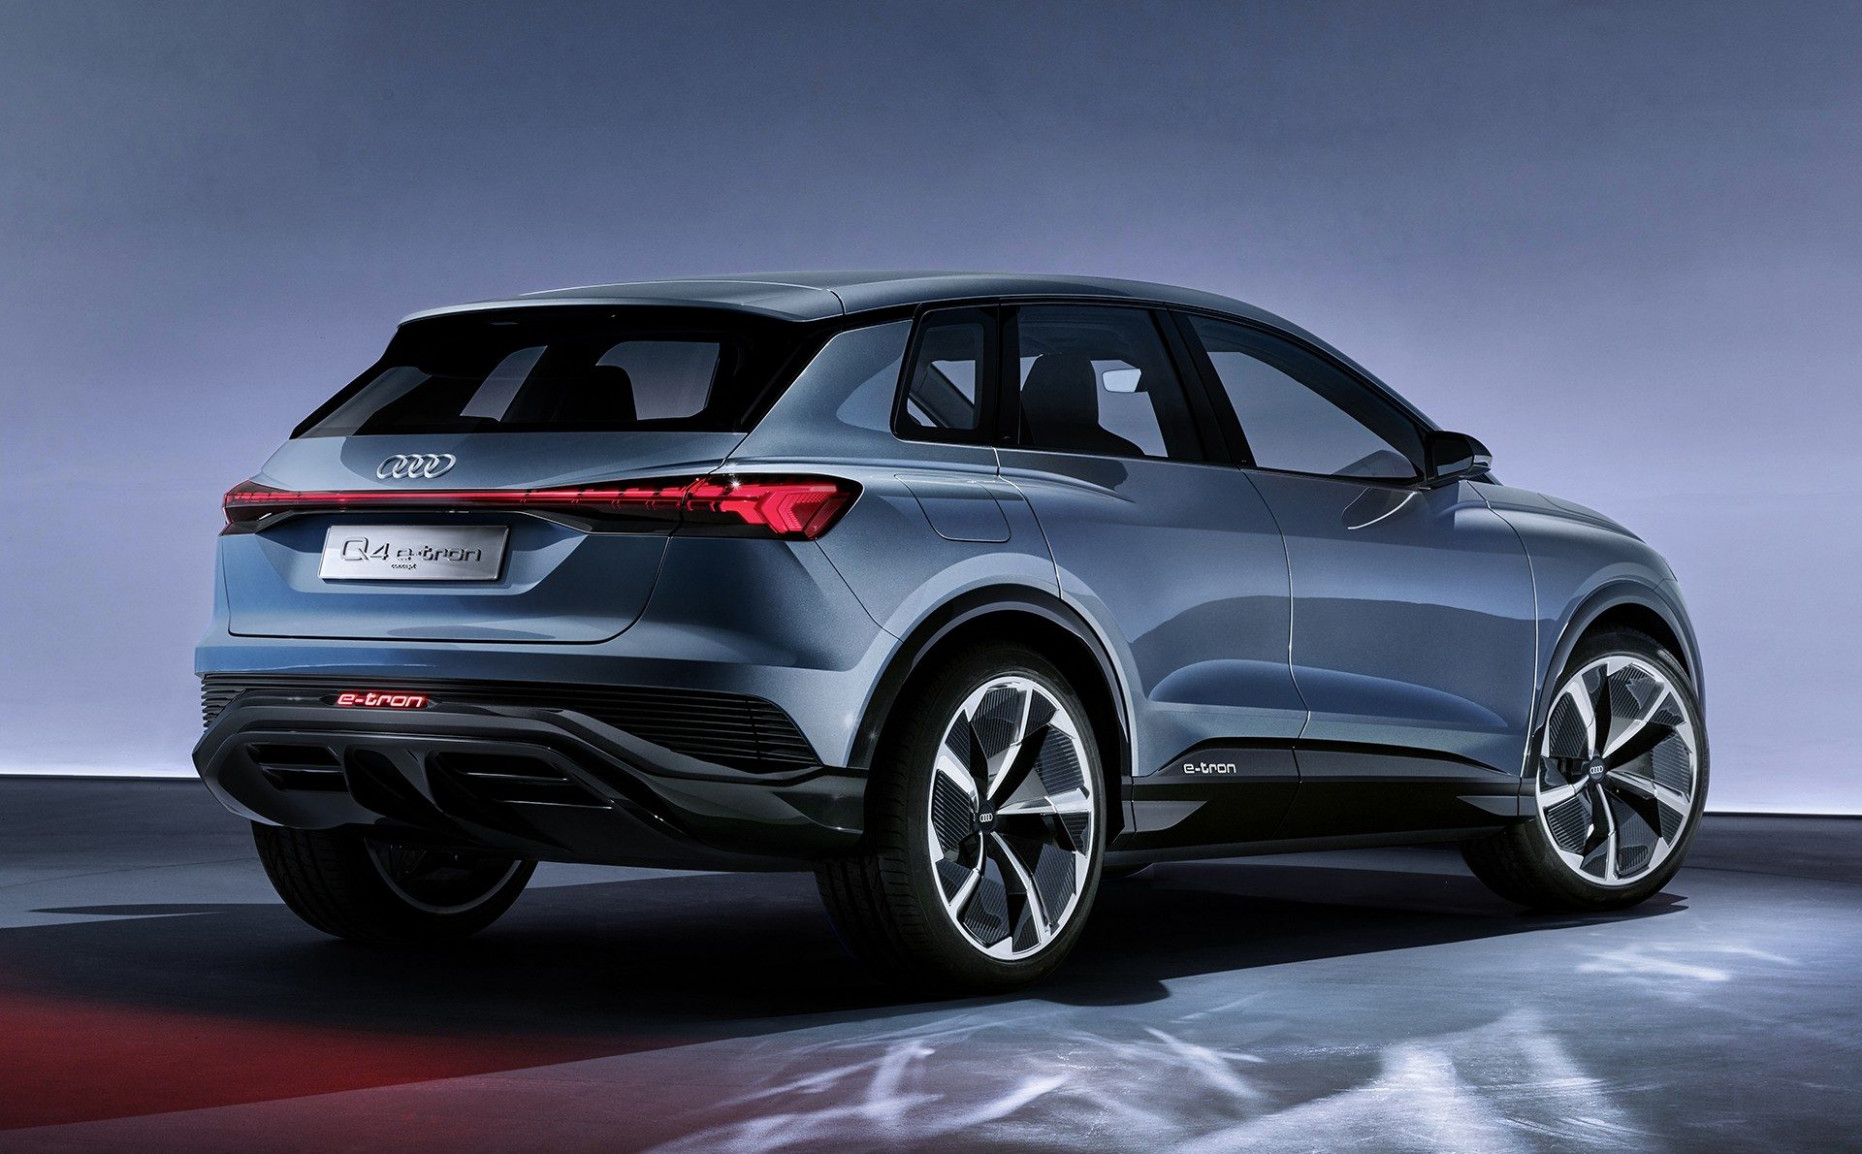 Engine When Does The 2022 Audi Q5 Come Out